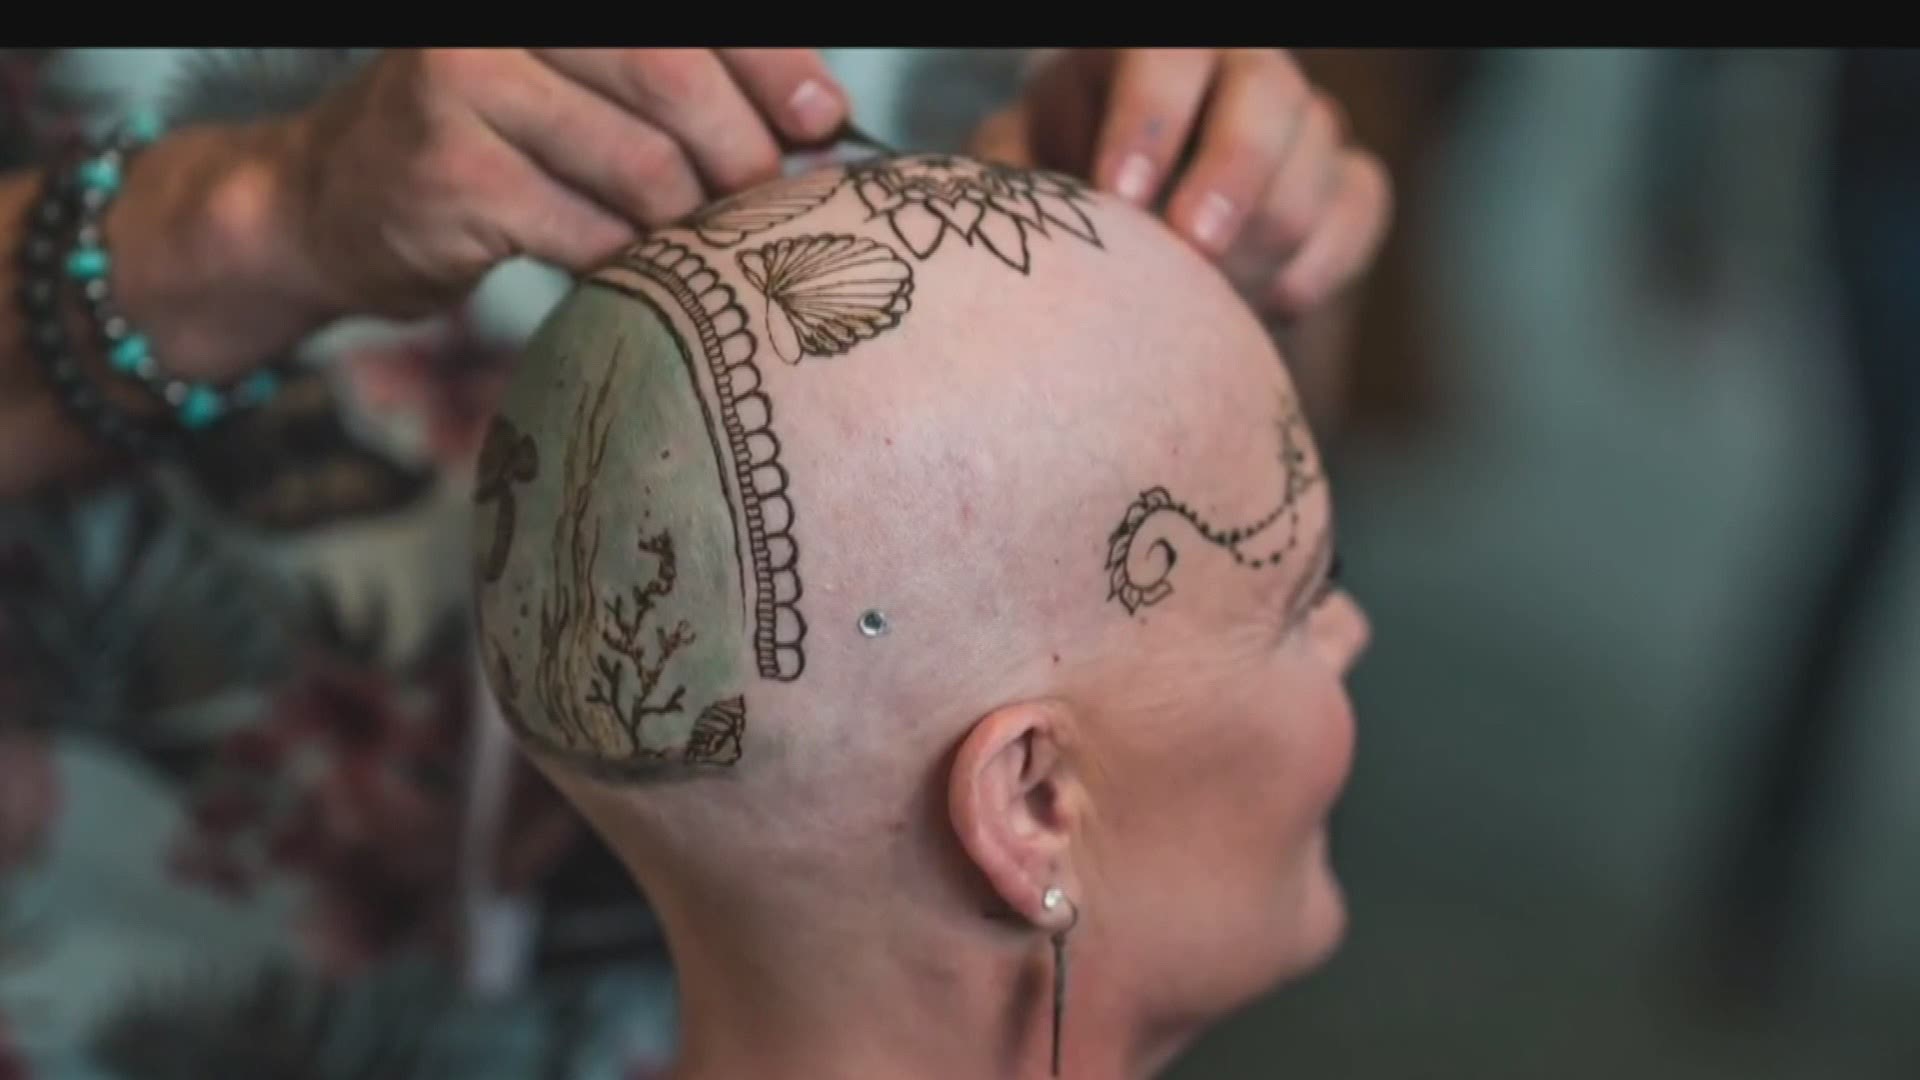 Henna Crowns of Courage is a non-profit that brings Henna art to cancer survivors.